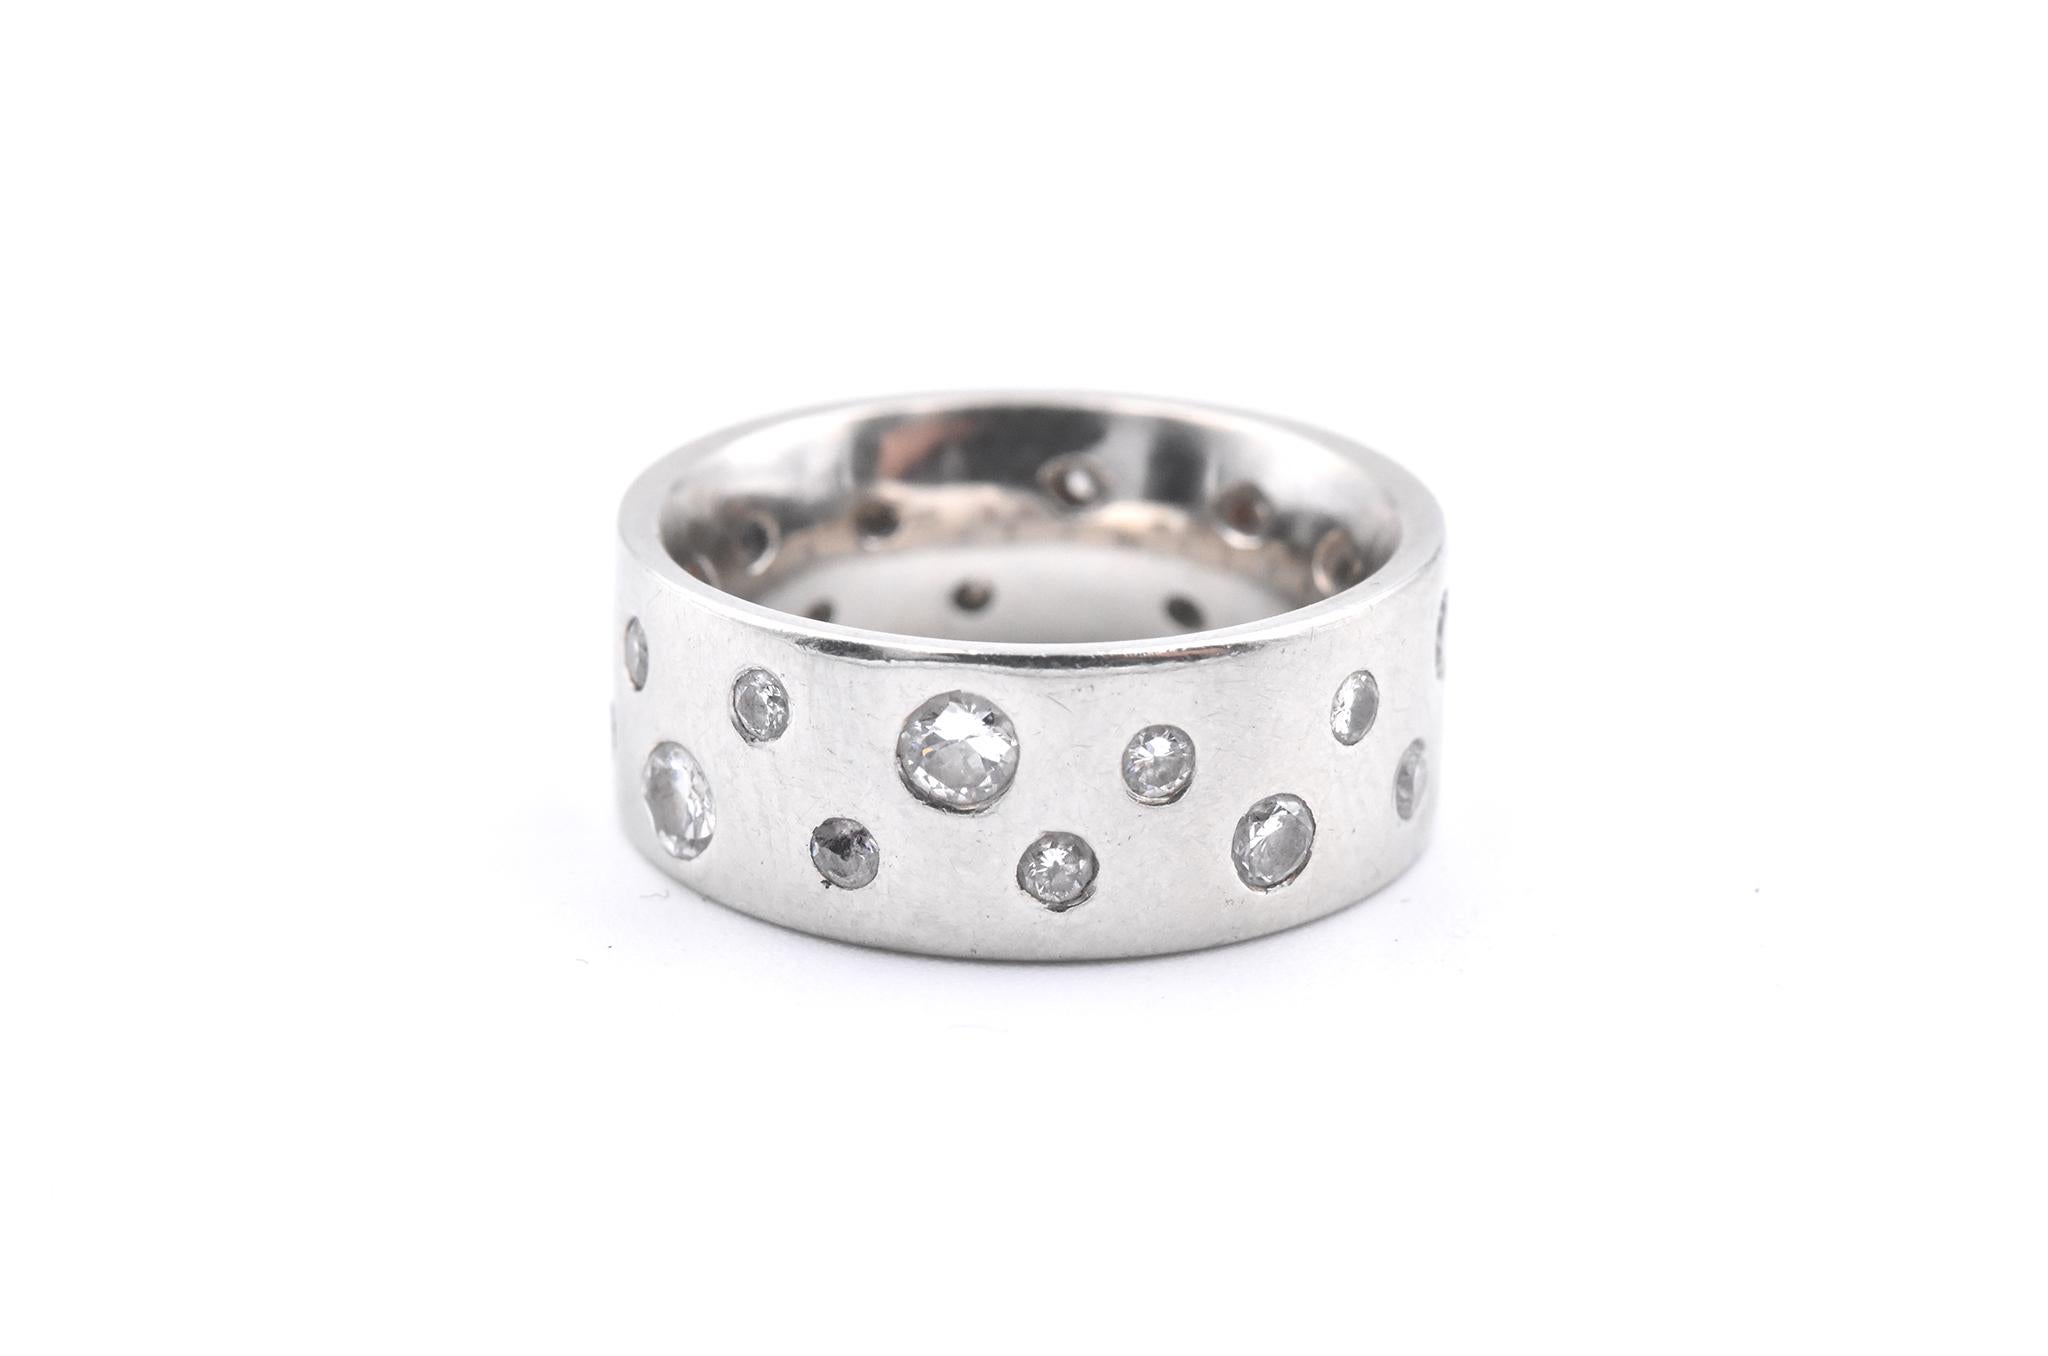 Material: 18k white gold
Diamonds: 24 round brilliant cuts = 1.00cttw
Color: G-I
Clarity: VS2-SI2
Ring Size: 4 ¼ (please allow two additional shipping days for sizing requests)
Dimensions: ring measures 7.30mm in width
Weight: 9.02 grams
